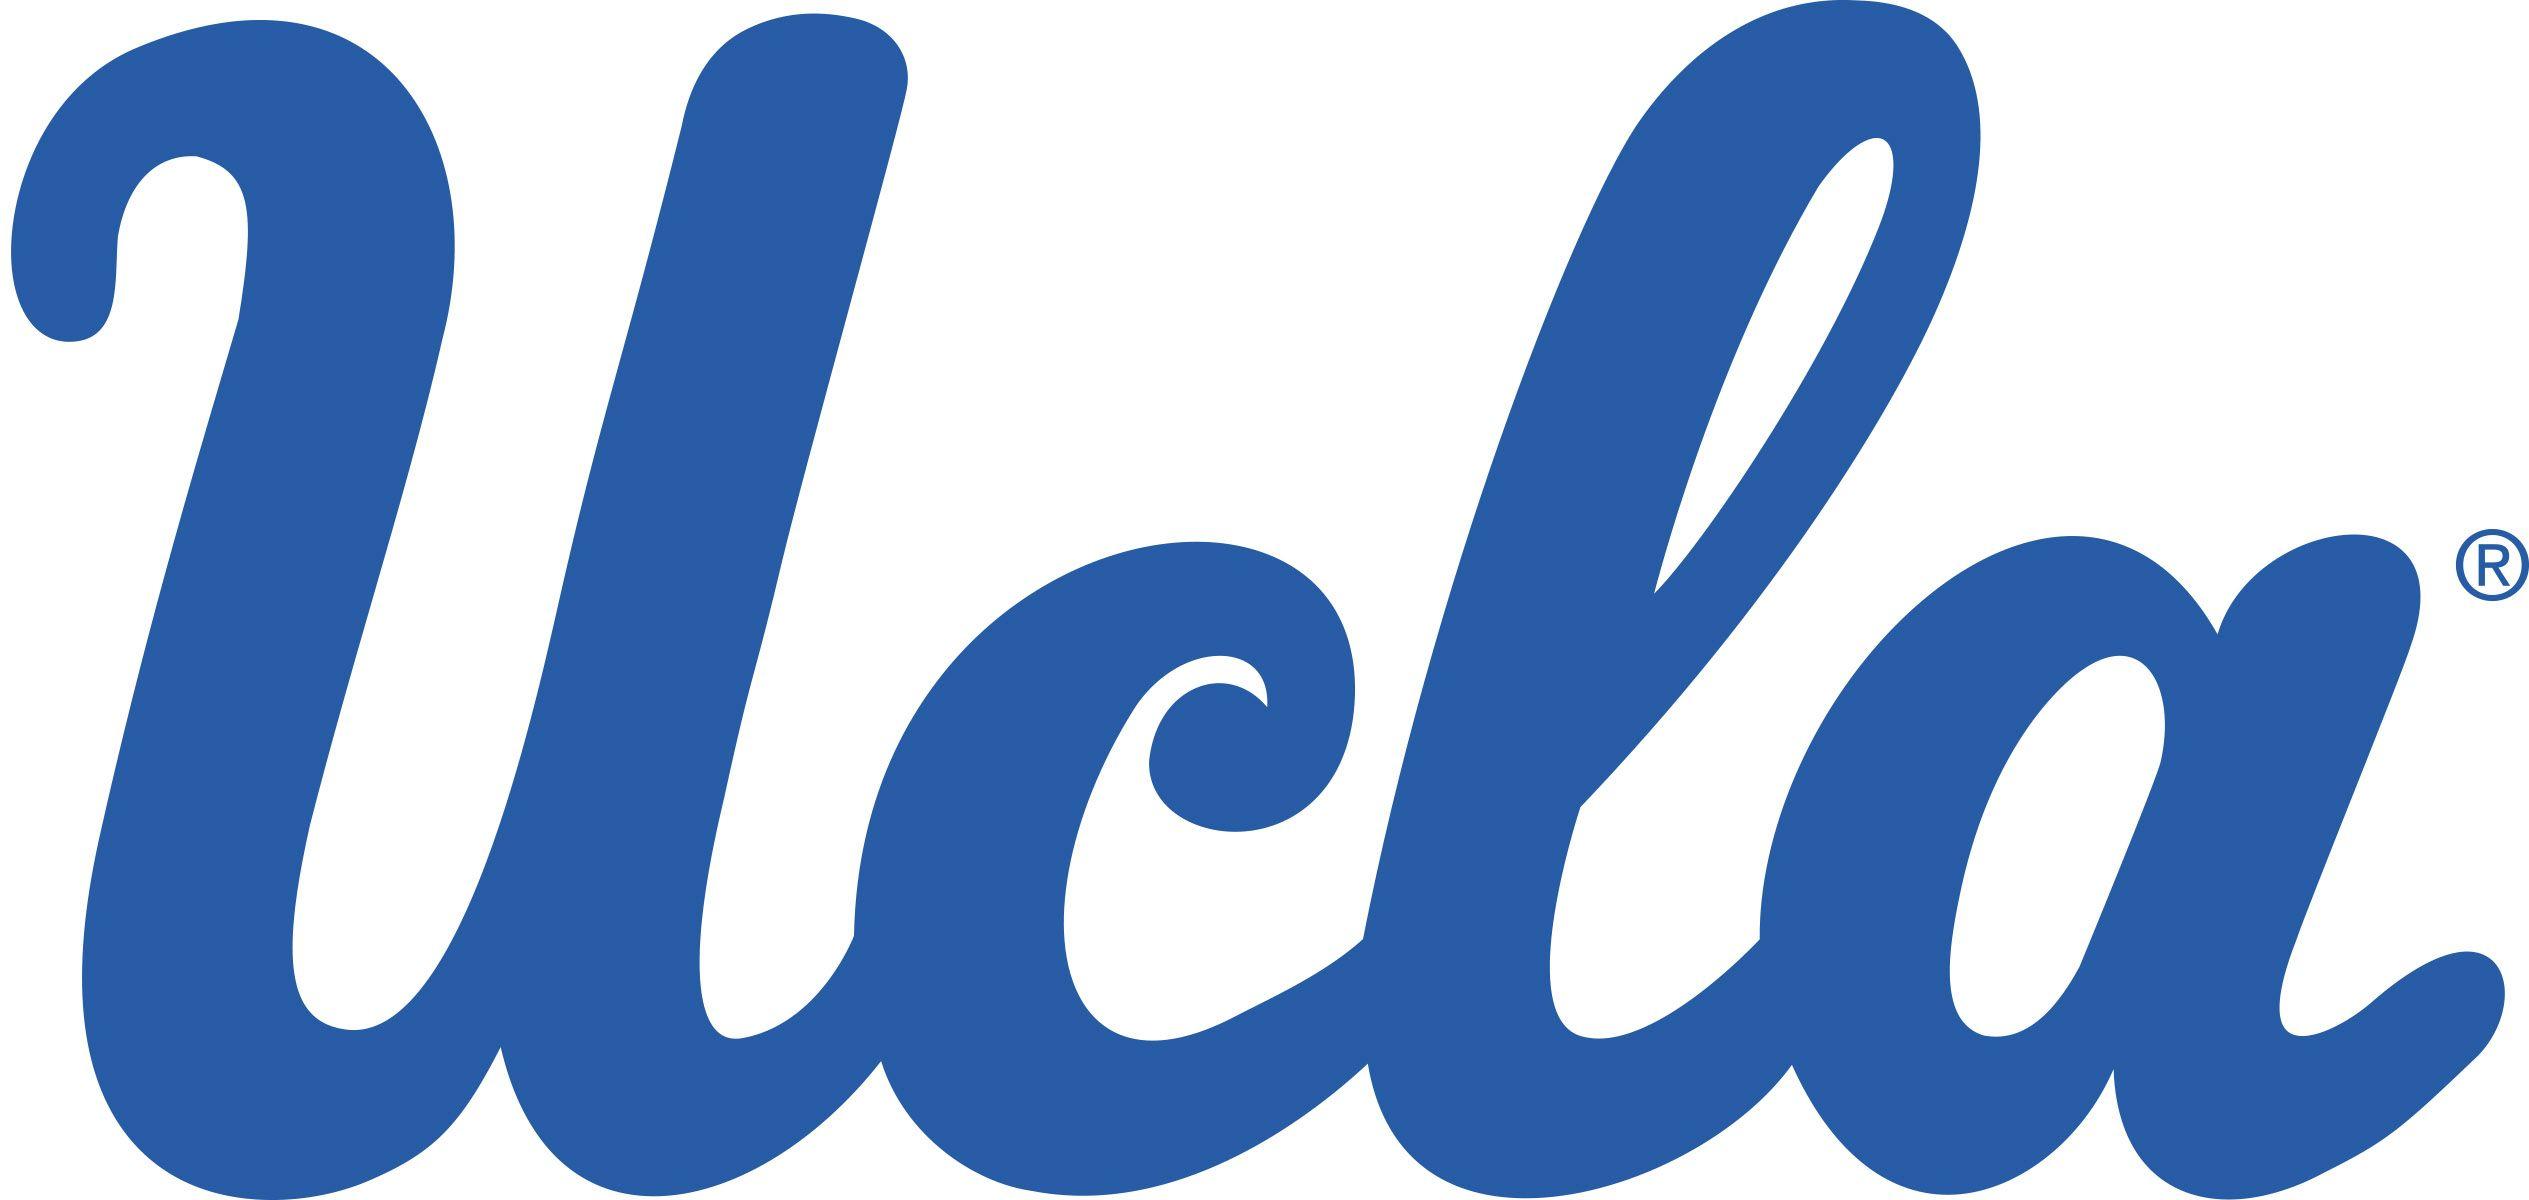 UCLA Logo - UCLA releases updated logo, colors before Under Armour debut